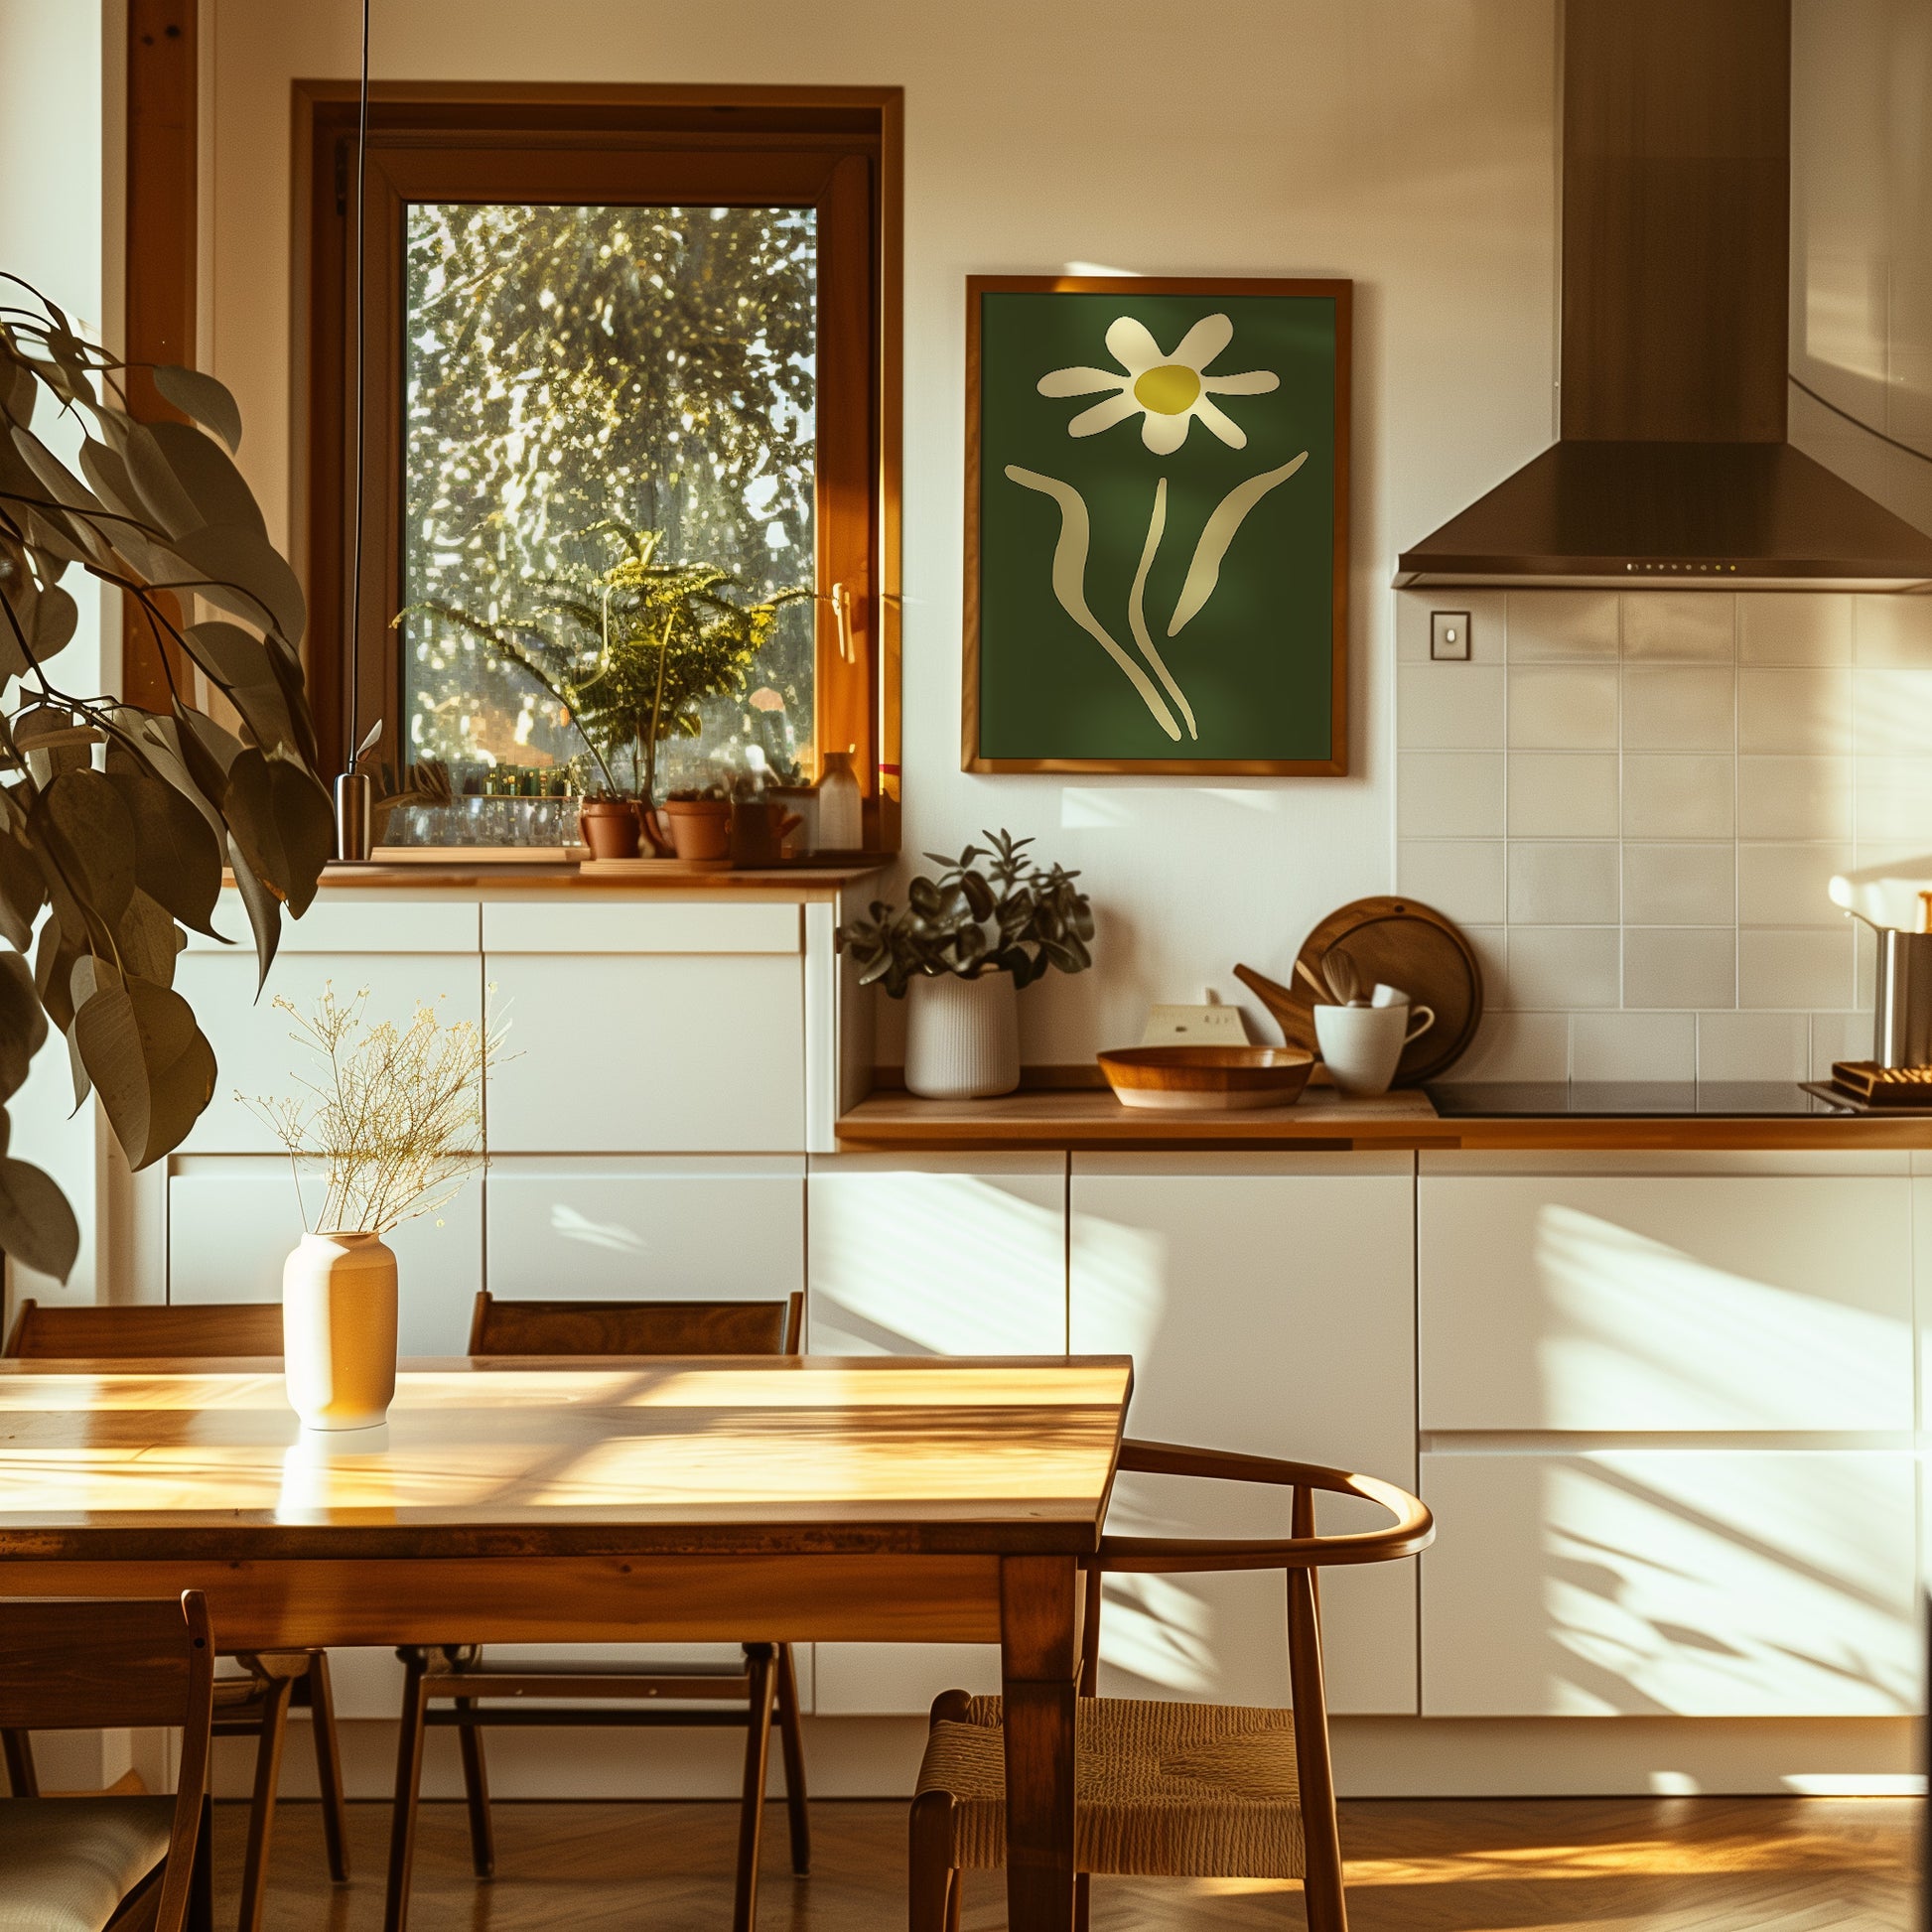 A cozy modern kitchen with sunlight streaming in, featuring a wooden table and vibrant green plants.